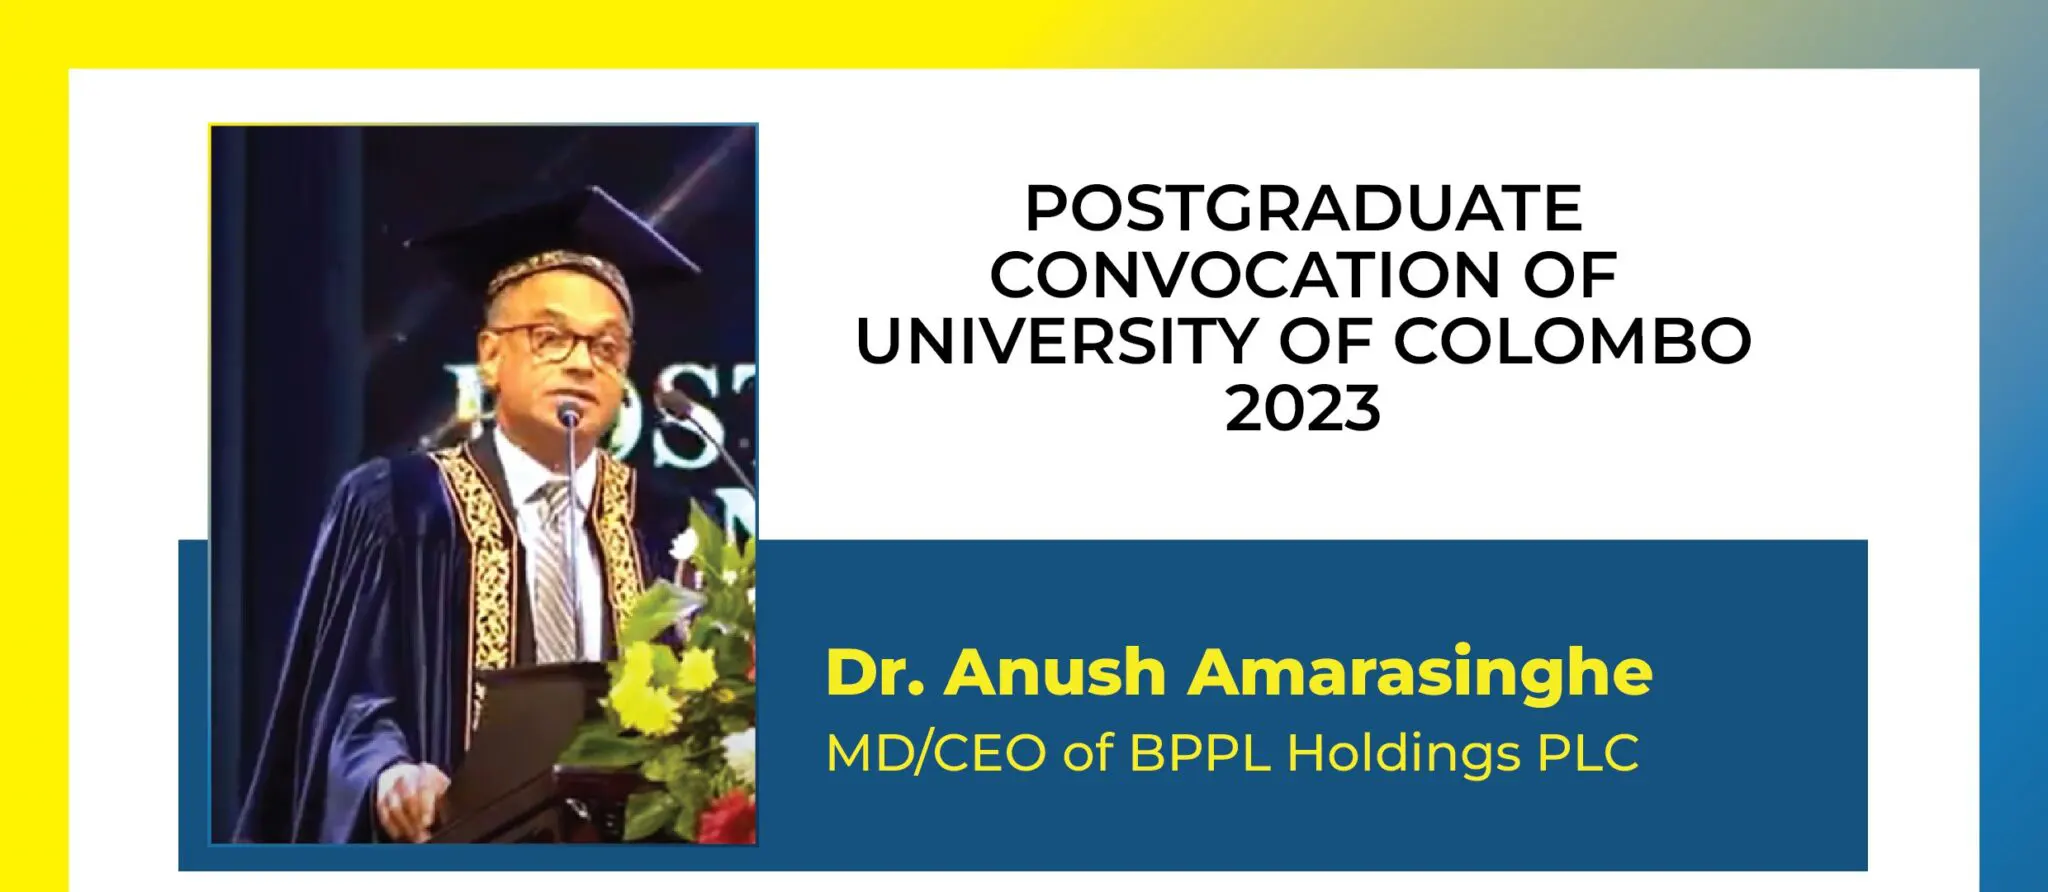 SPEECH GIVEN BY DR. ANUSH AMARASINGHE, ADDRESSING THE GRADUATES AT UNIVERSITY OF COLOMBO. 